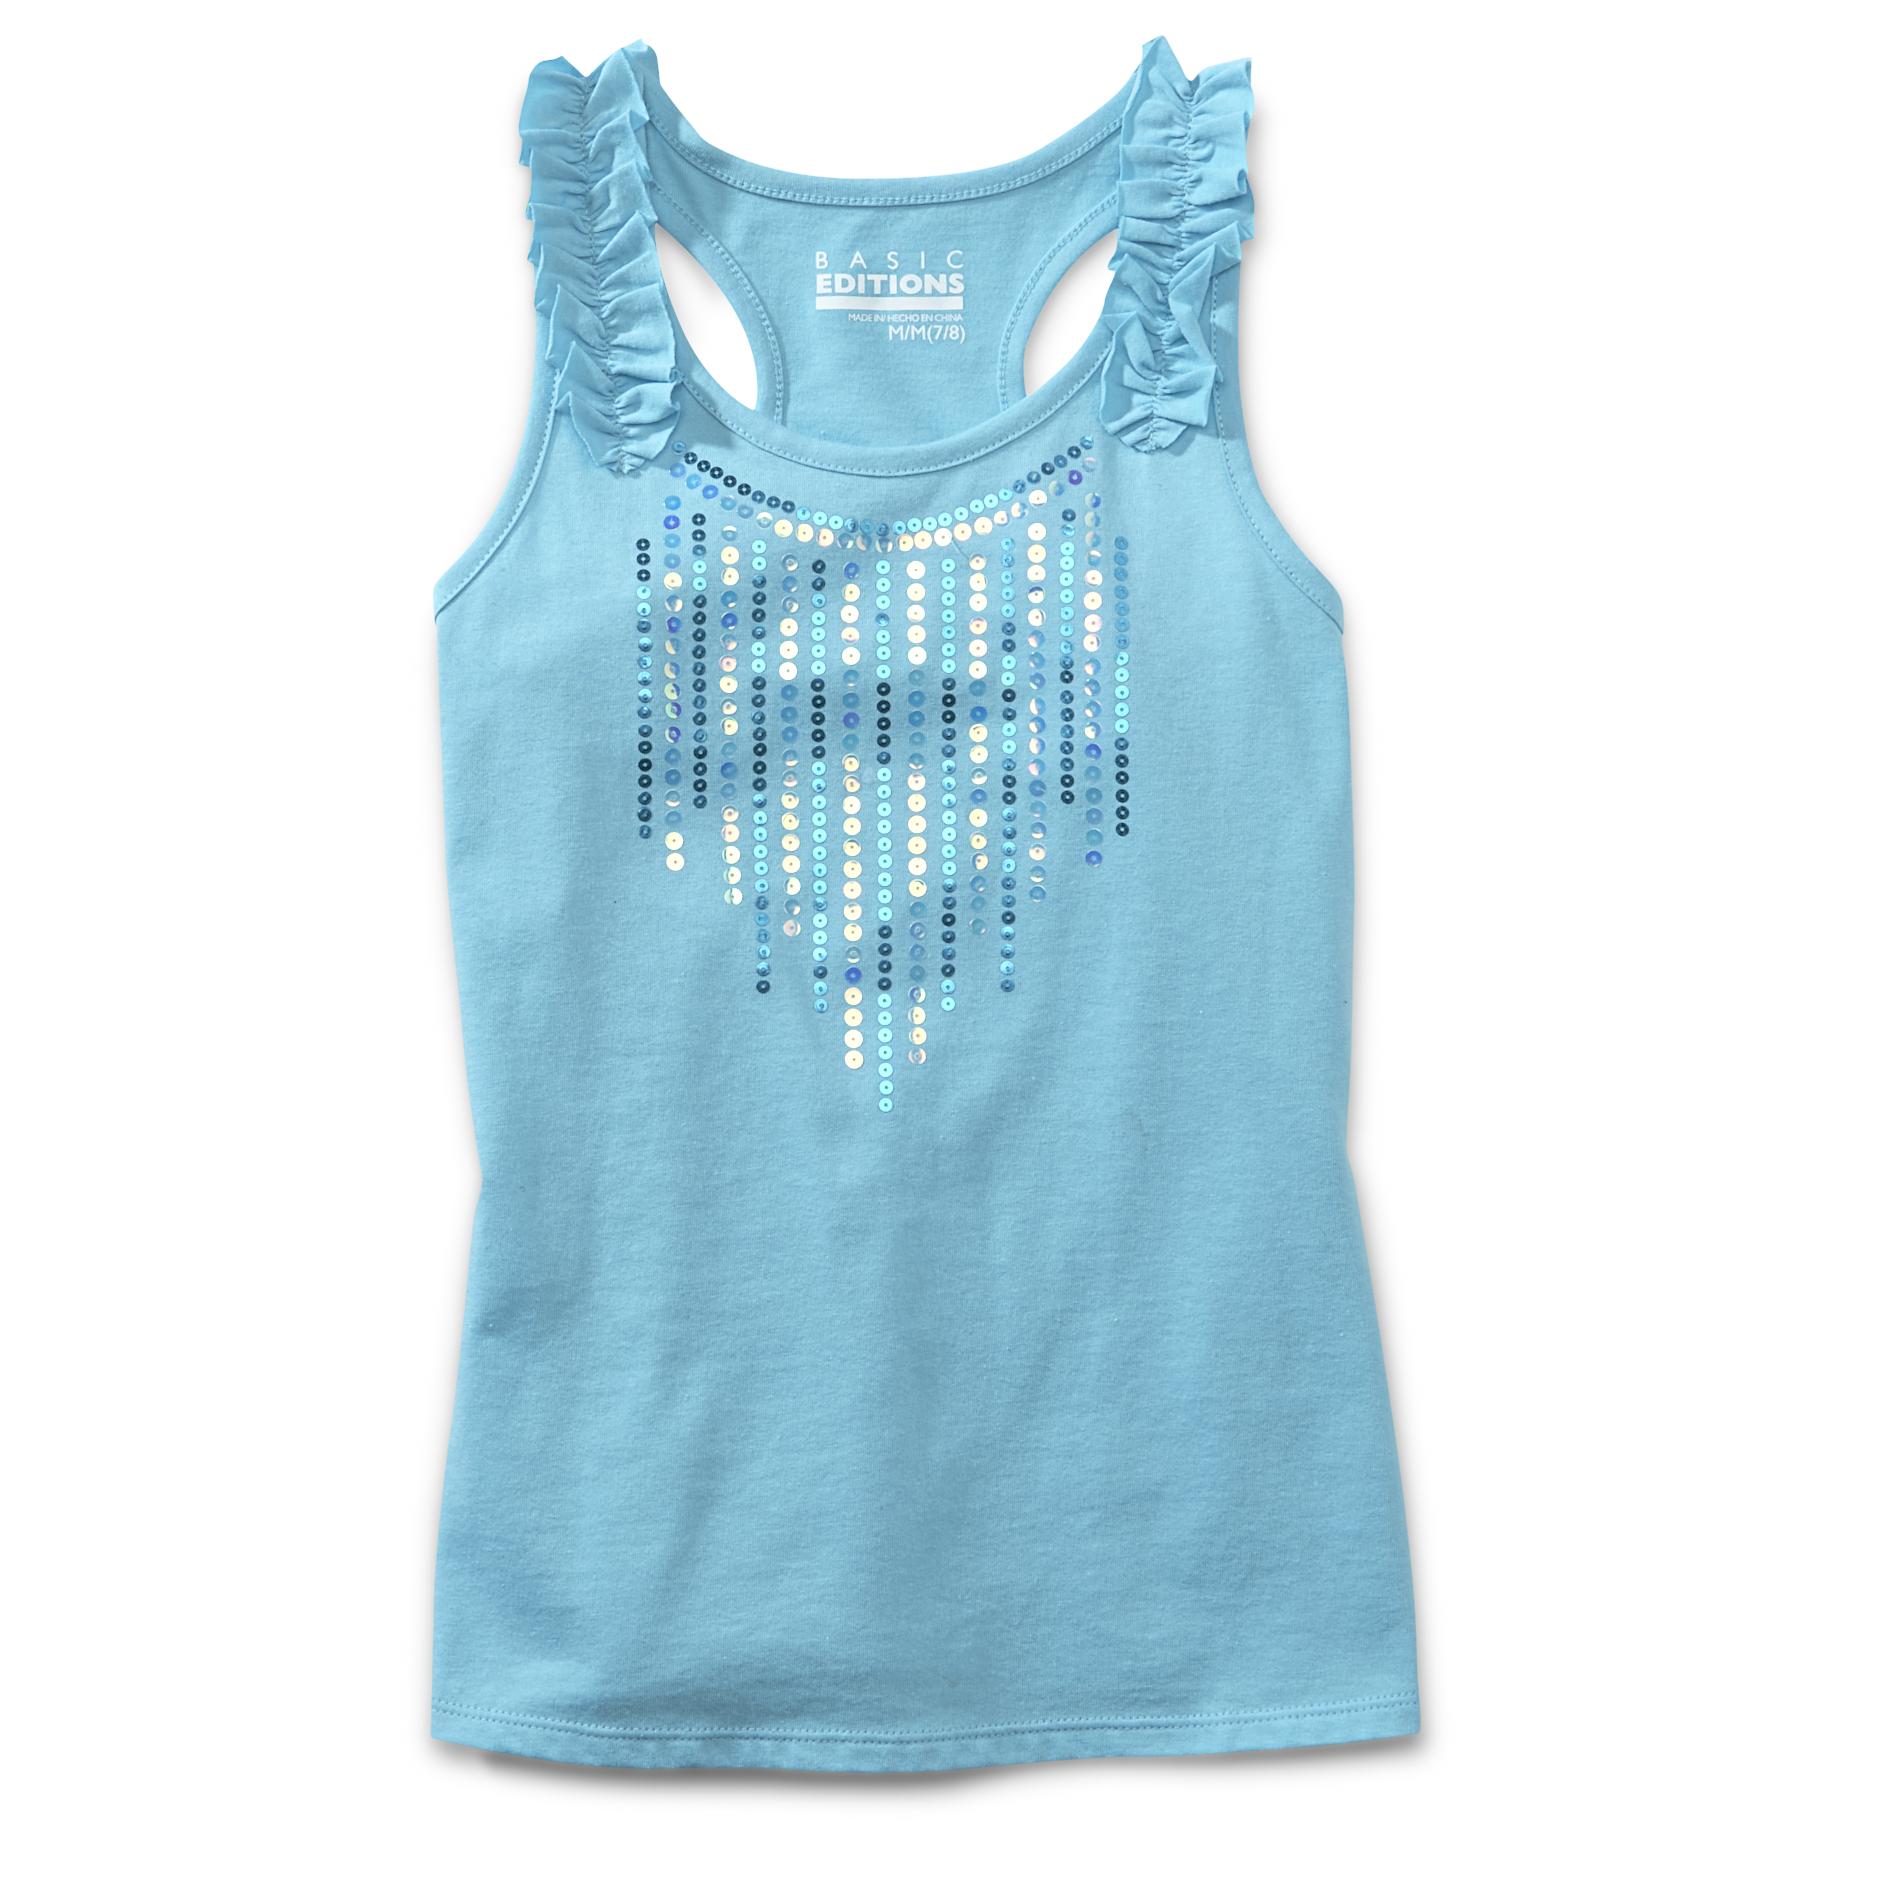 Basic Editions Girl's Racerback Tank Top - Sequins